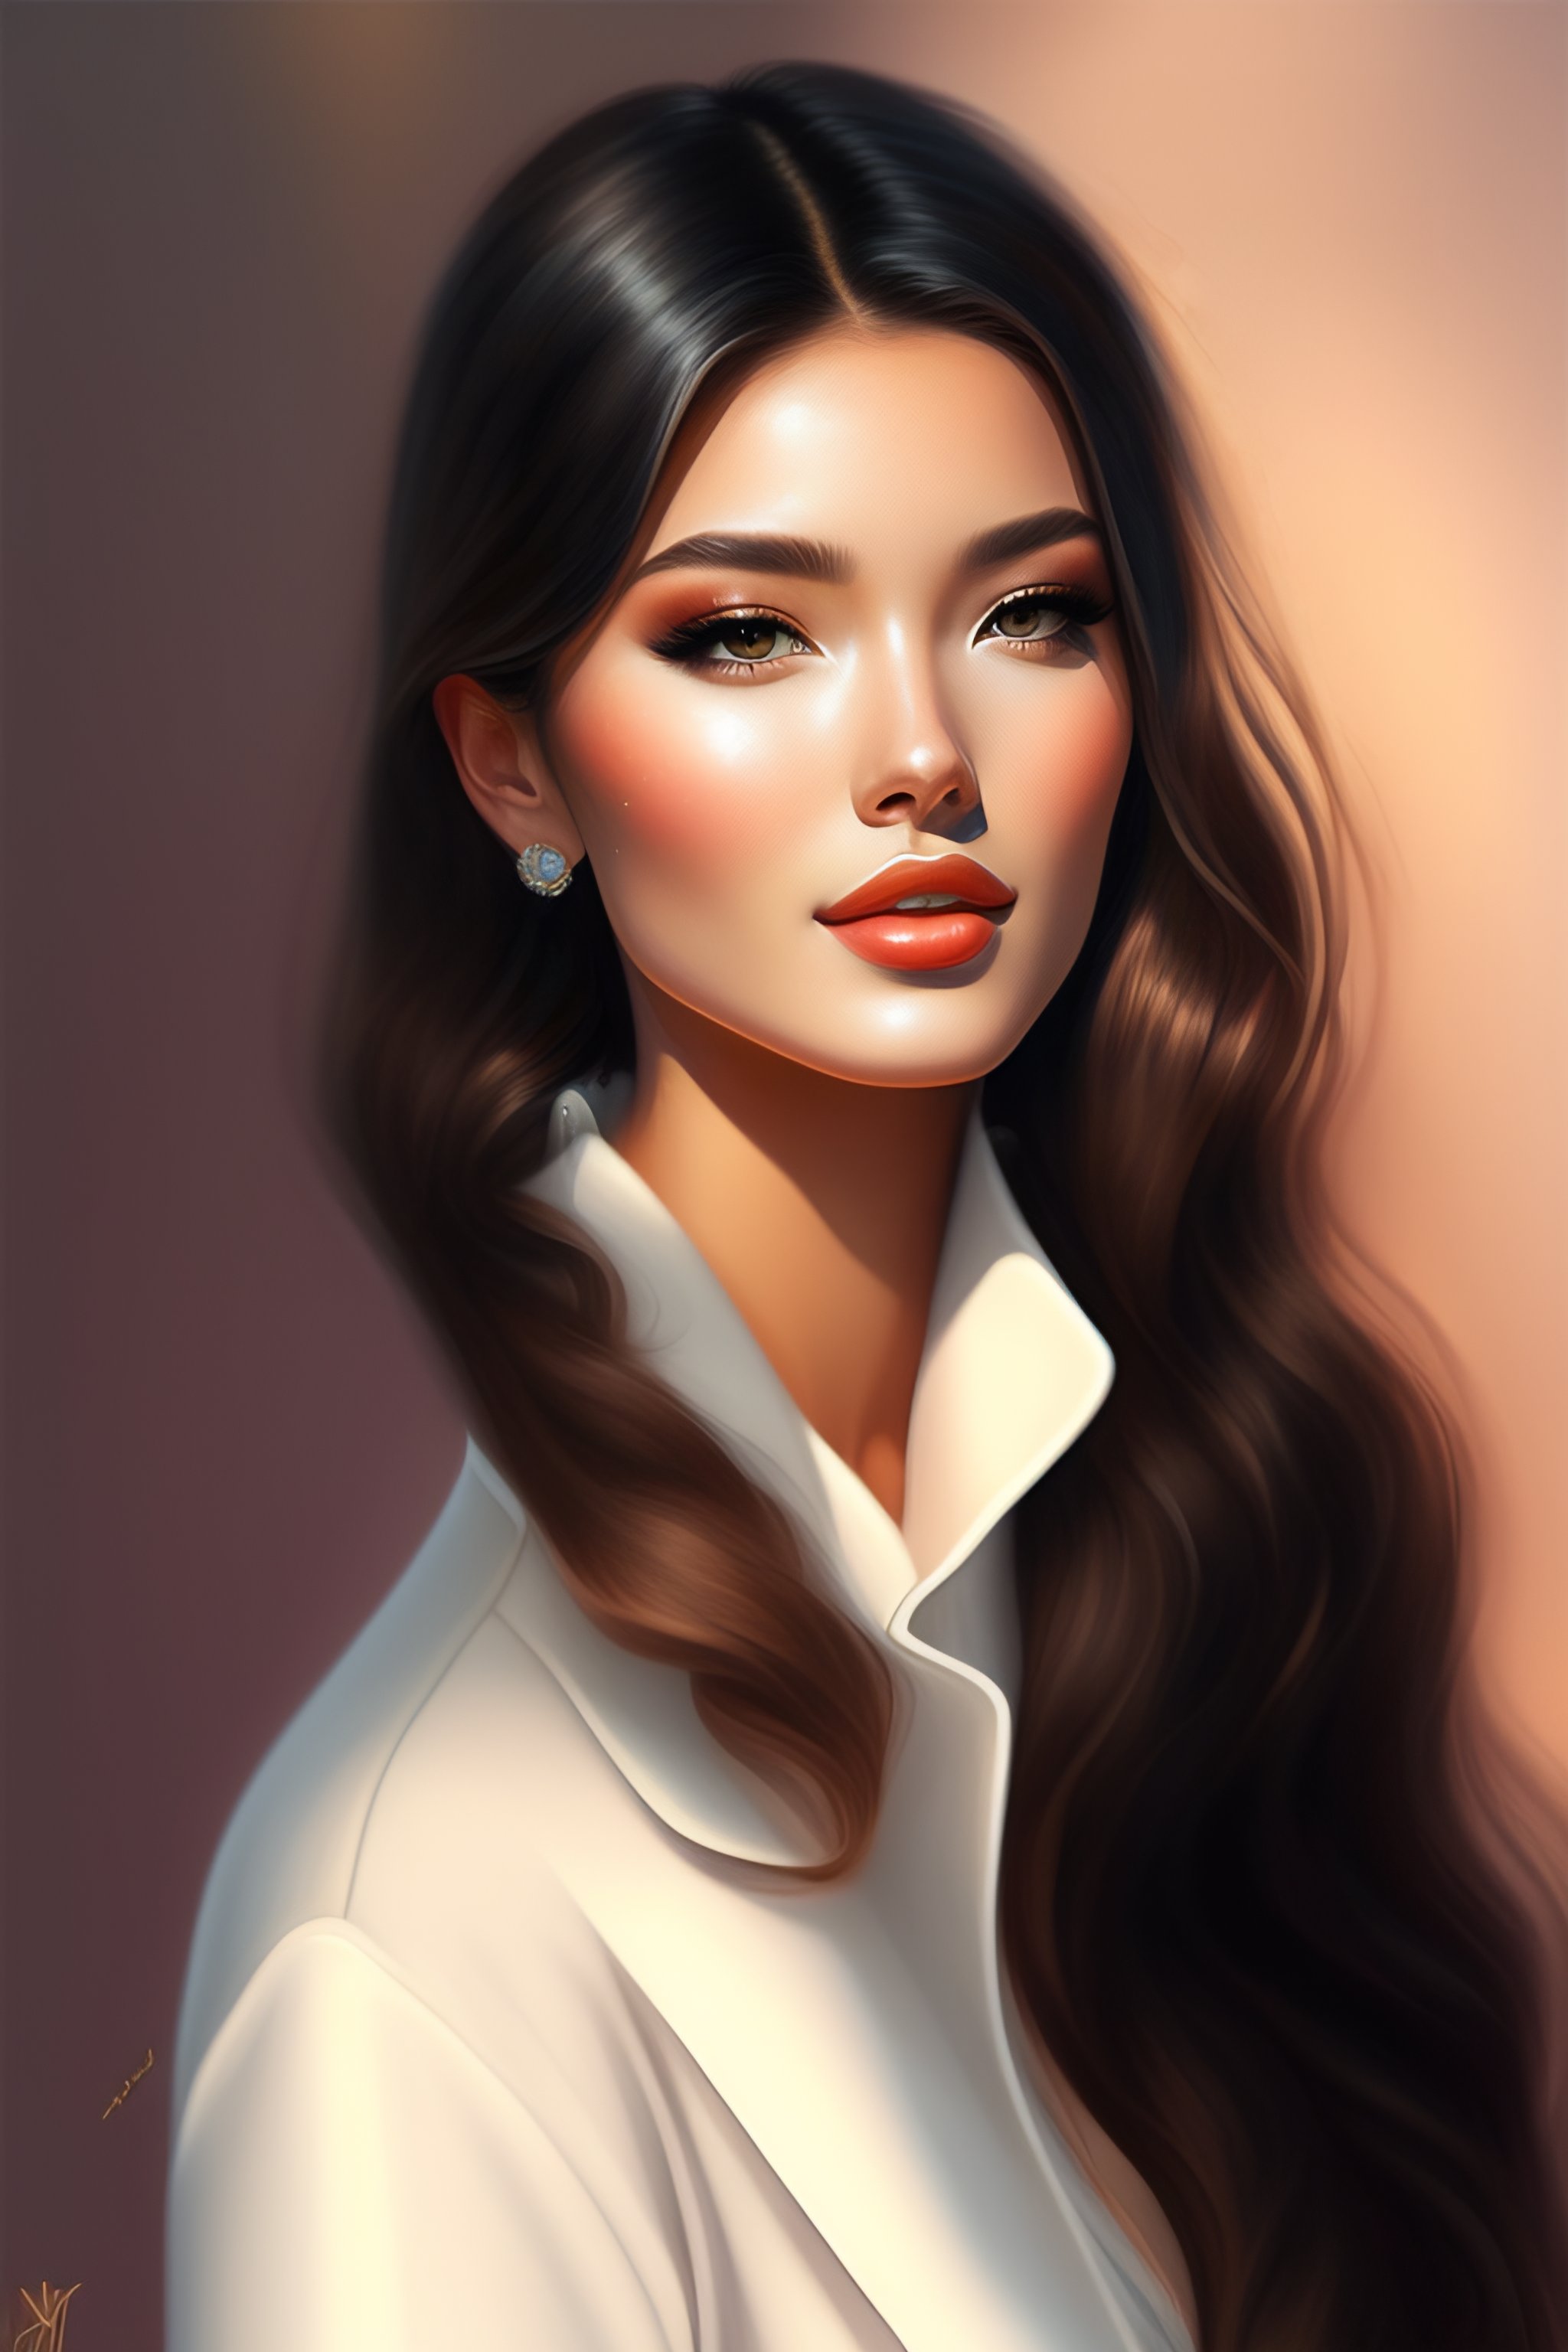 Lexica Elegant Girl In Urban Outfit Cute Fine Face Rounded Eyes Digital Painting